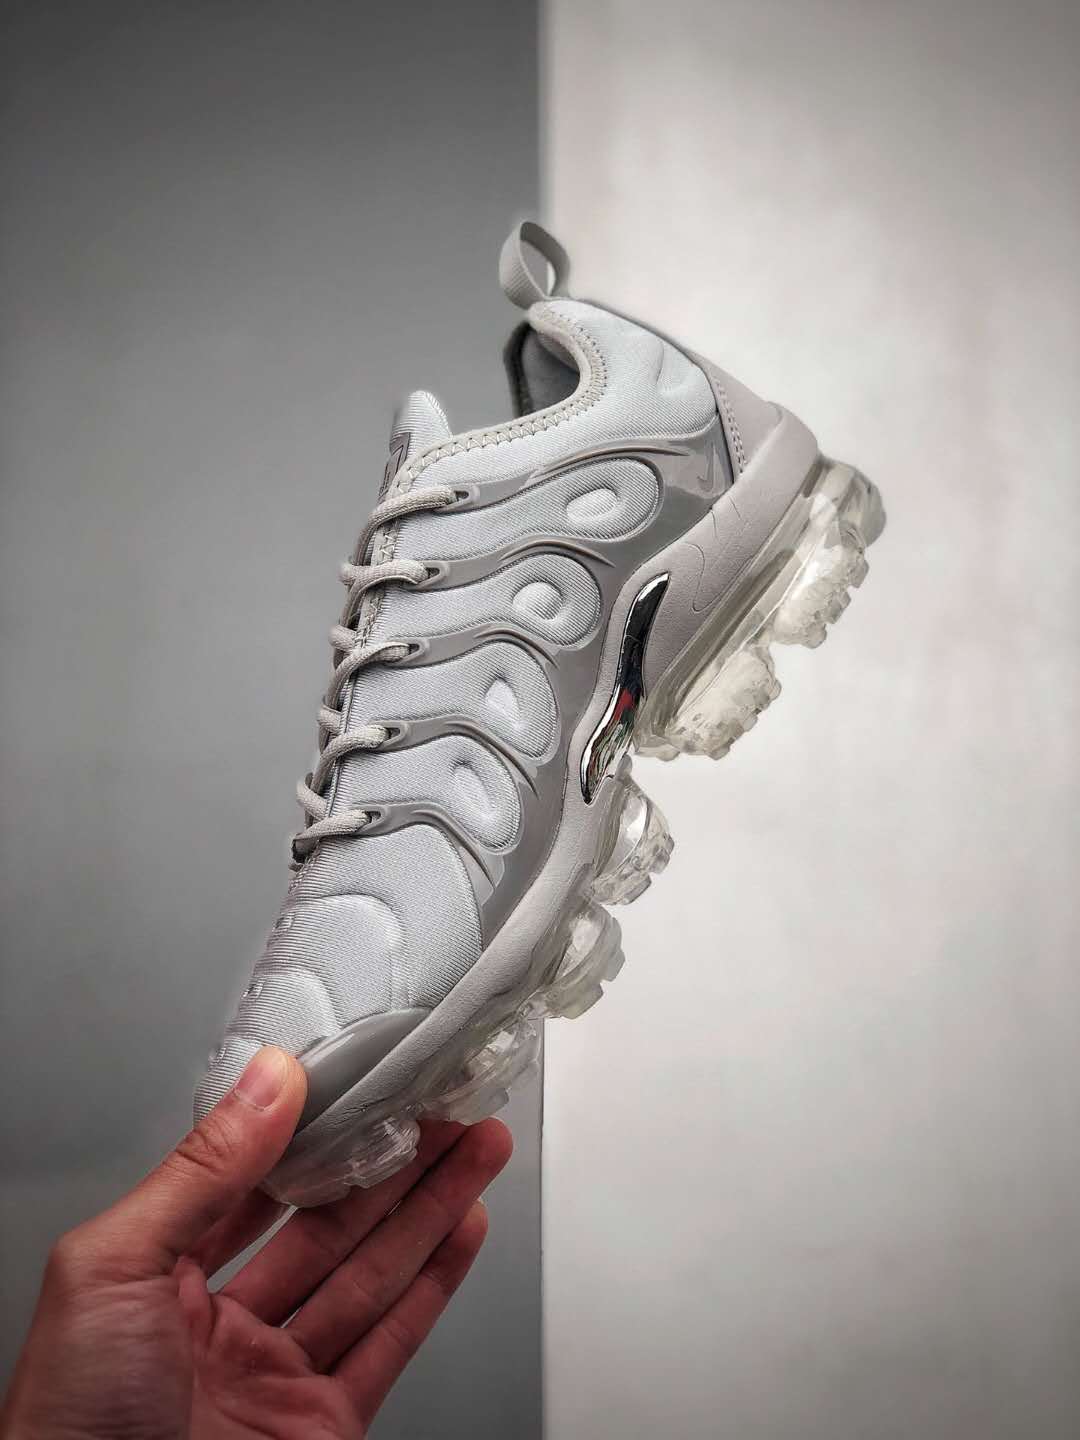 Nike Air VaporMax Plus 'Wolf Grey' 924453-005 - Shop the Hottest Sneaker in Chic Wolf Grey Shade!